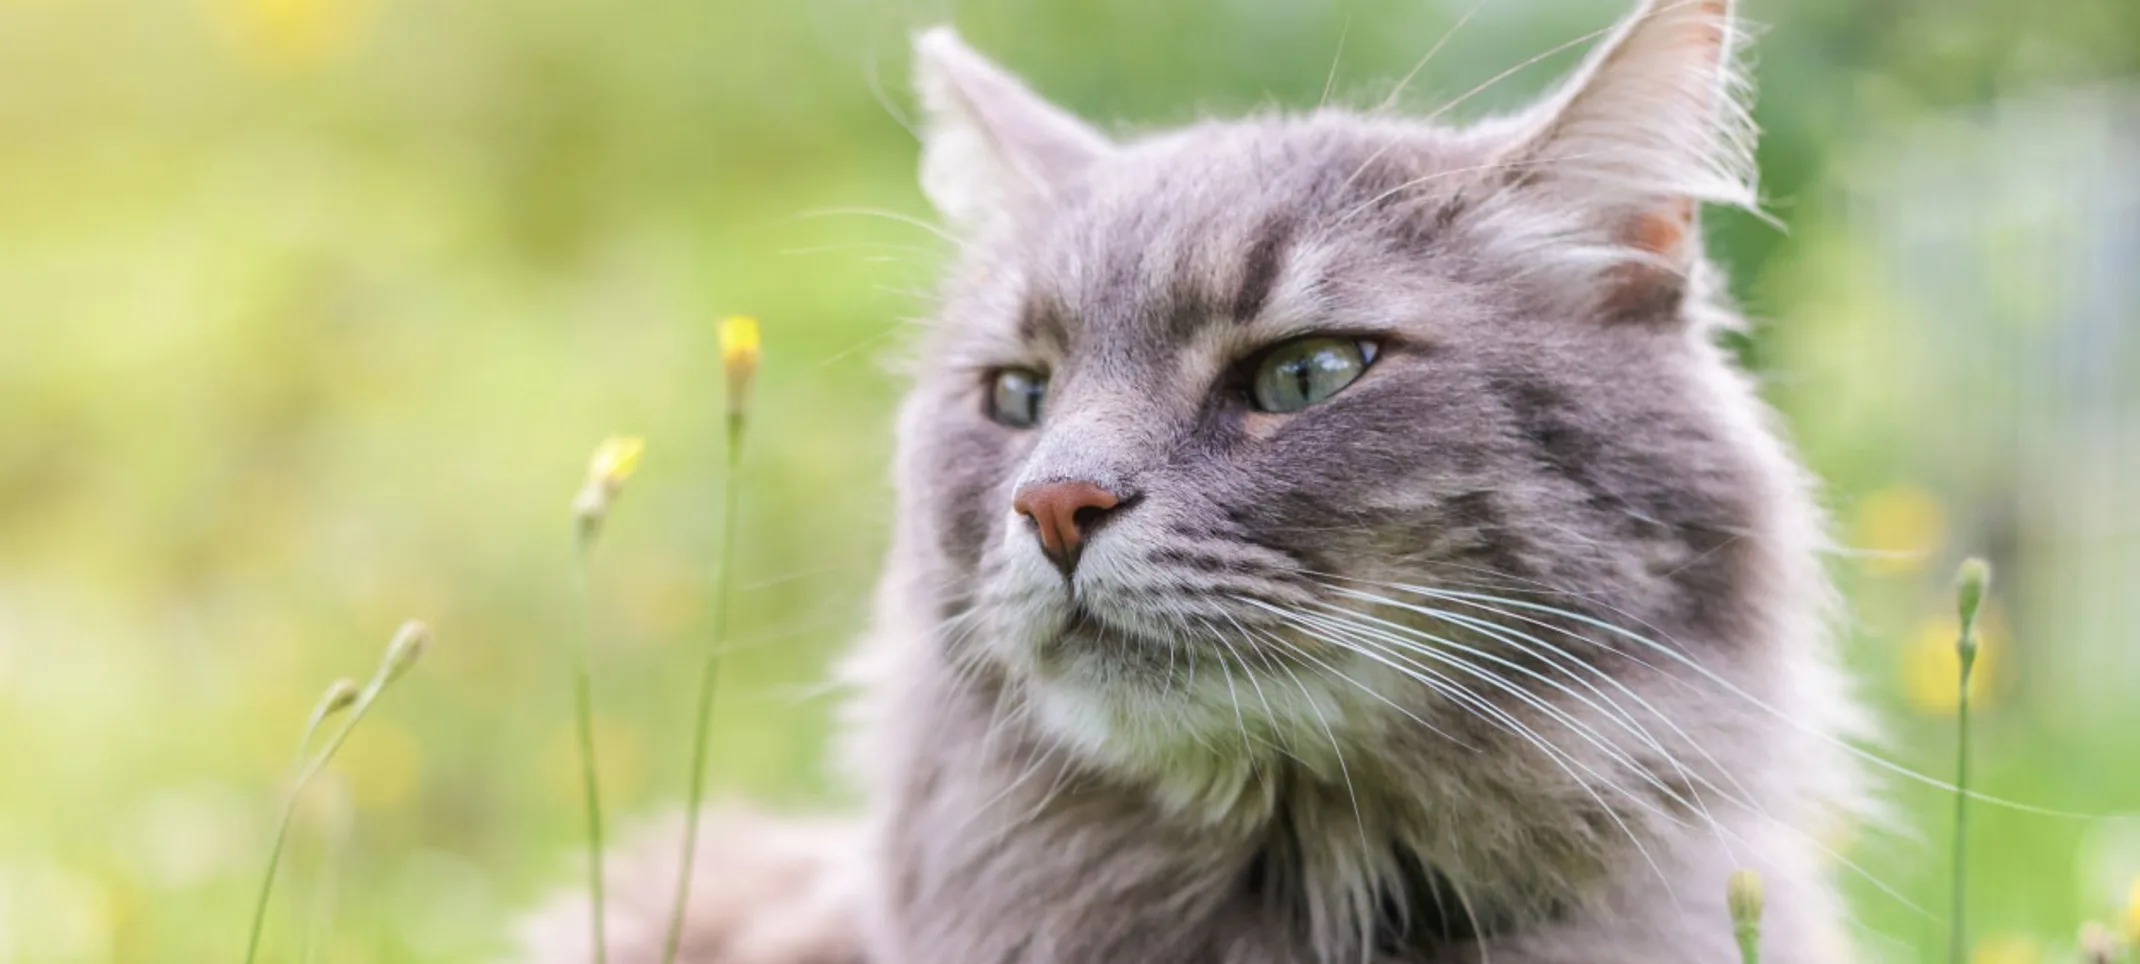 Grey furry cat is in a grassy, sunshine filled field looking at a small yellow flower.